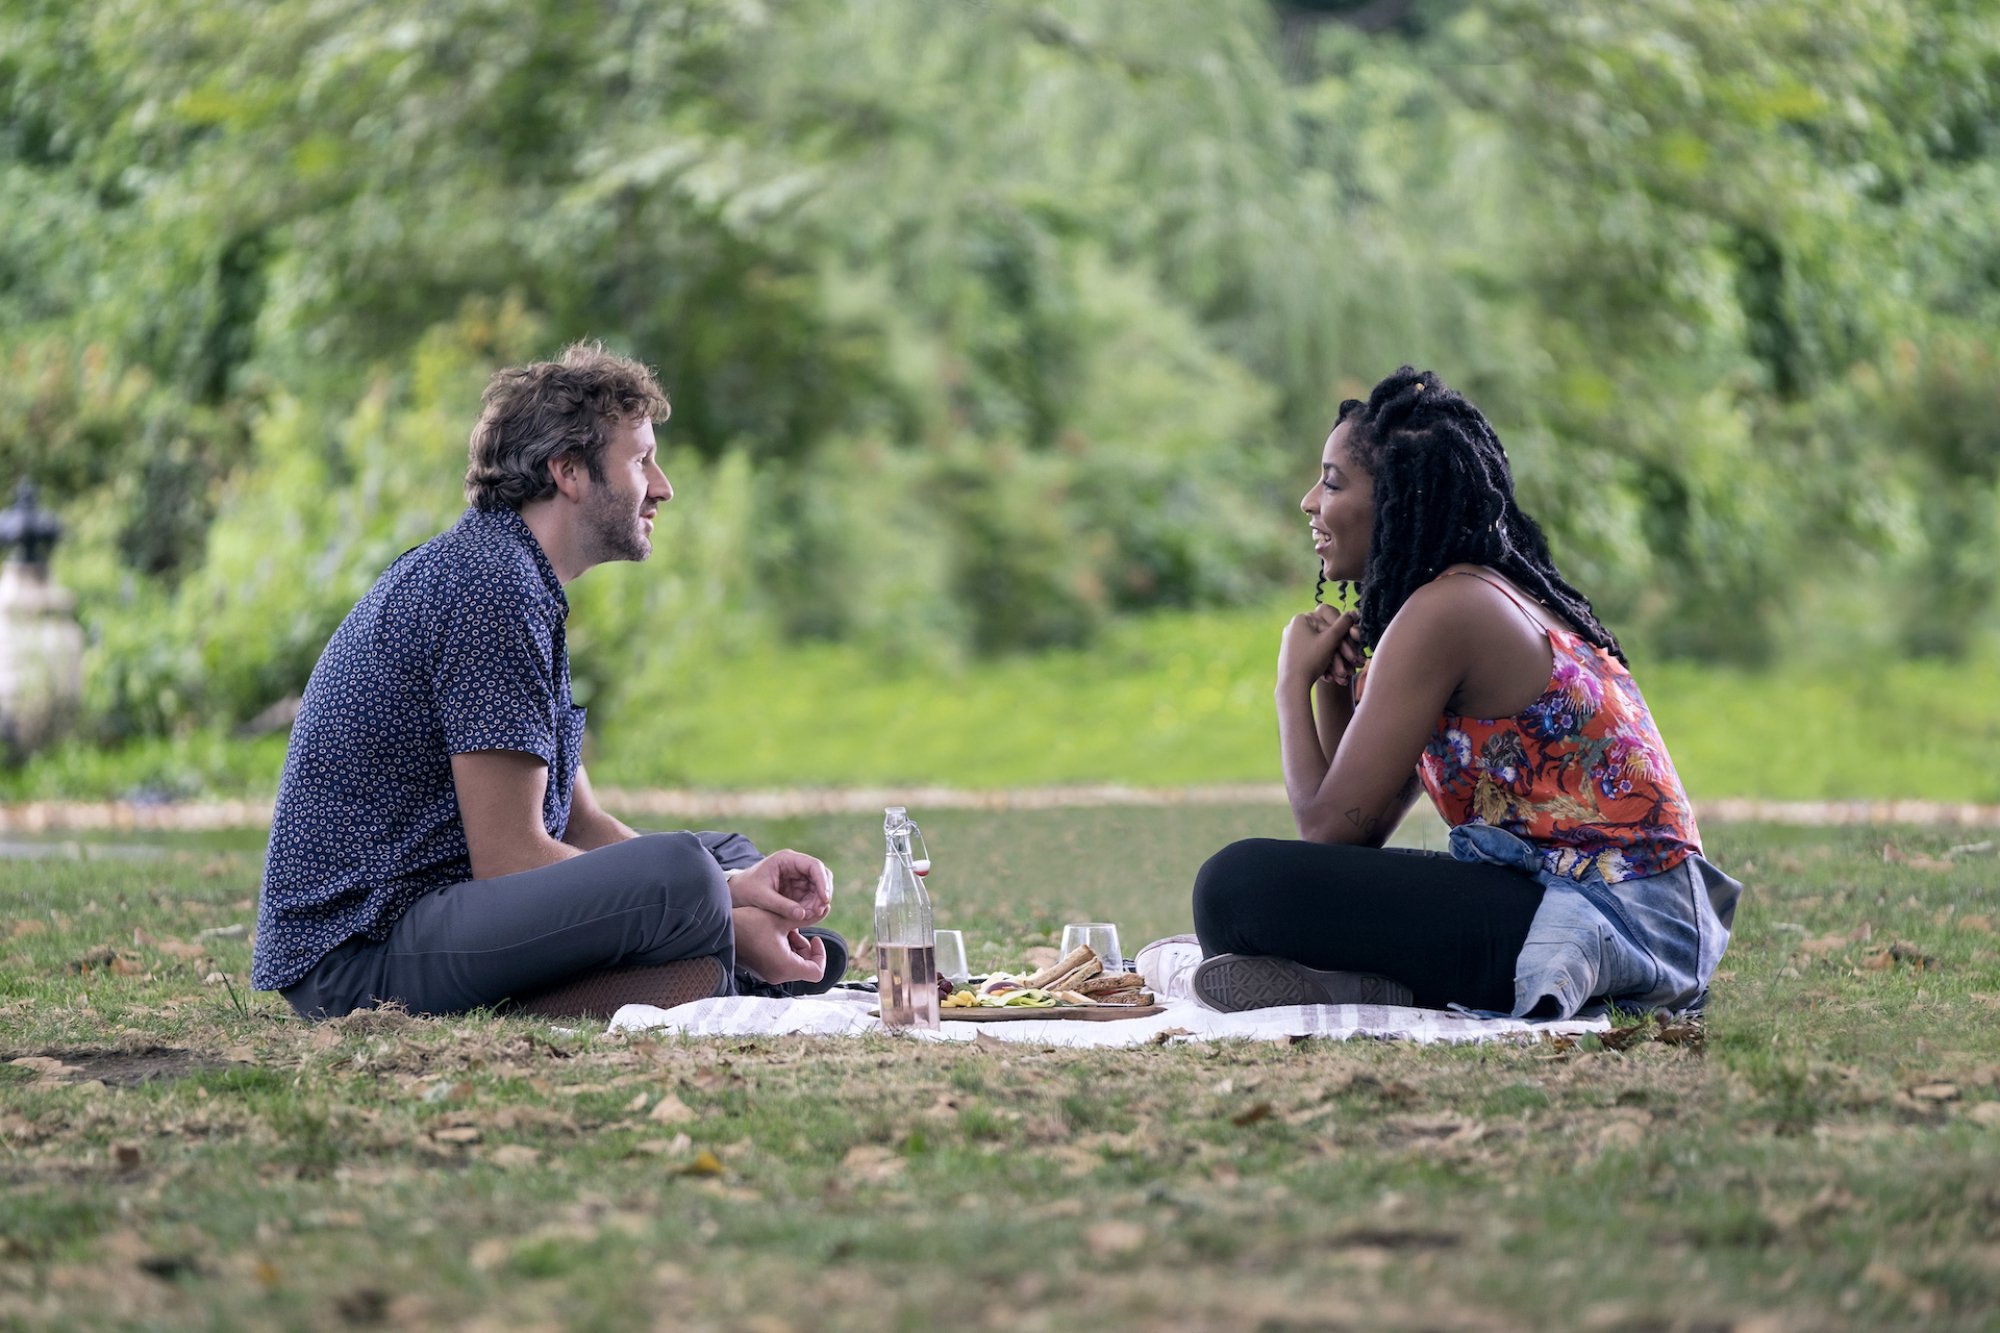 A scene from "The Incredible Jessica James": couple having a picnic